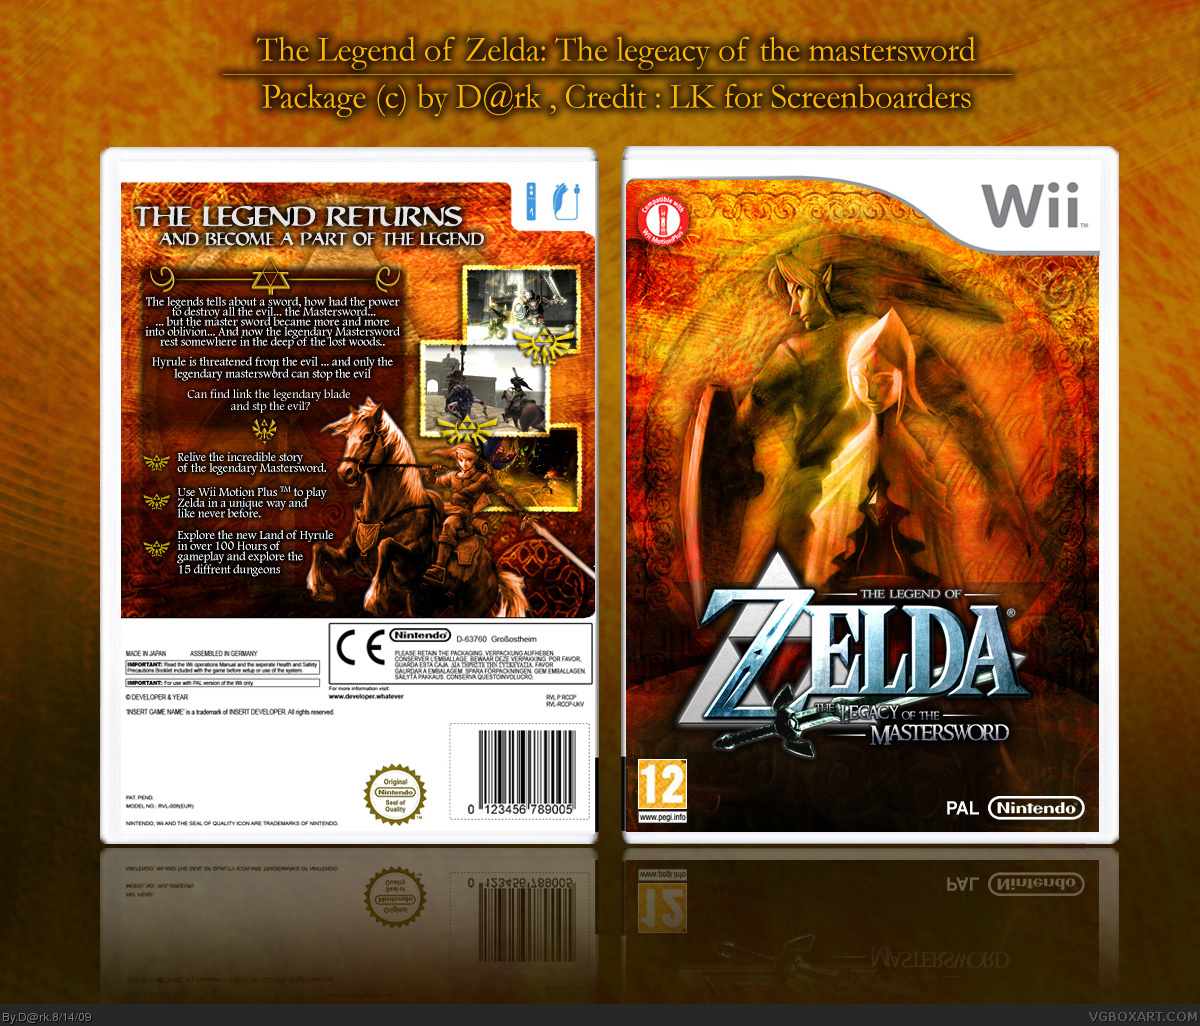 The Legend of Zelda: The legacy of the mastersword box cover